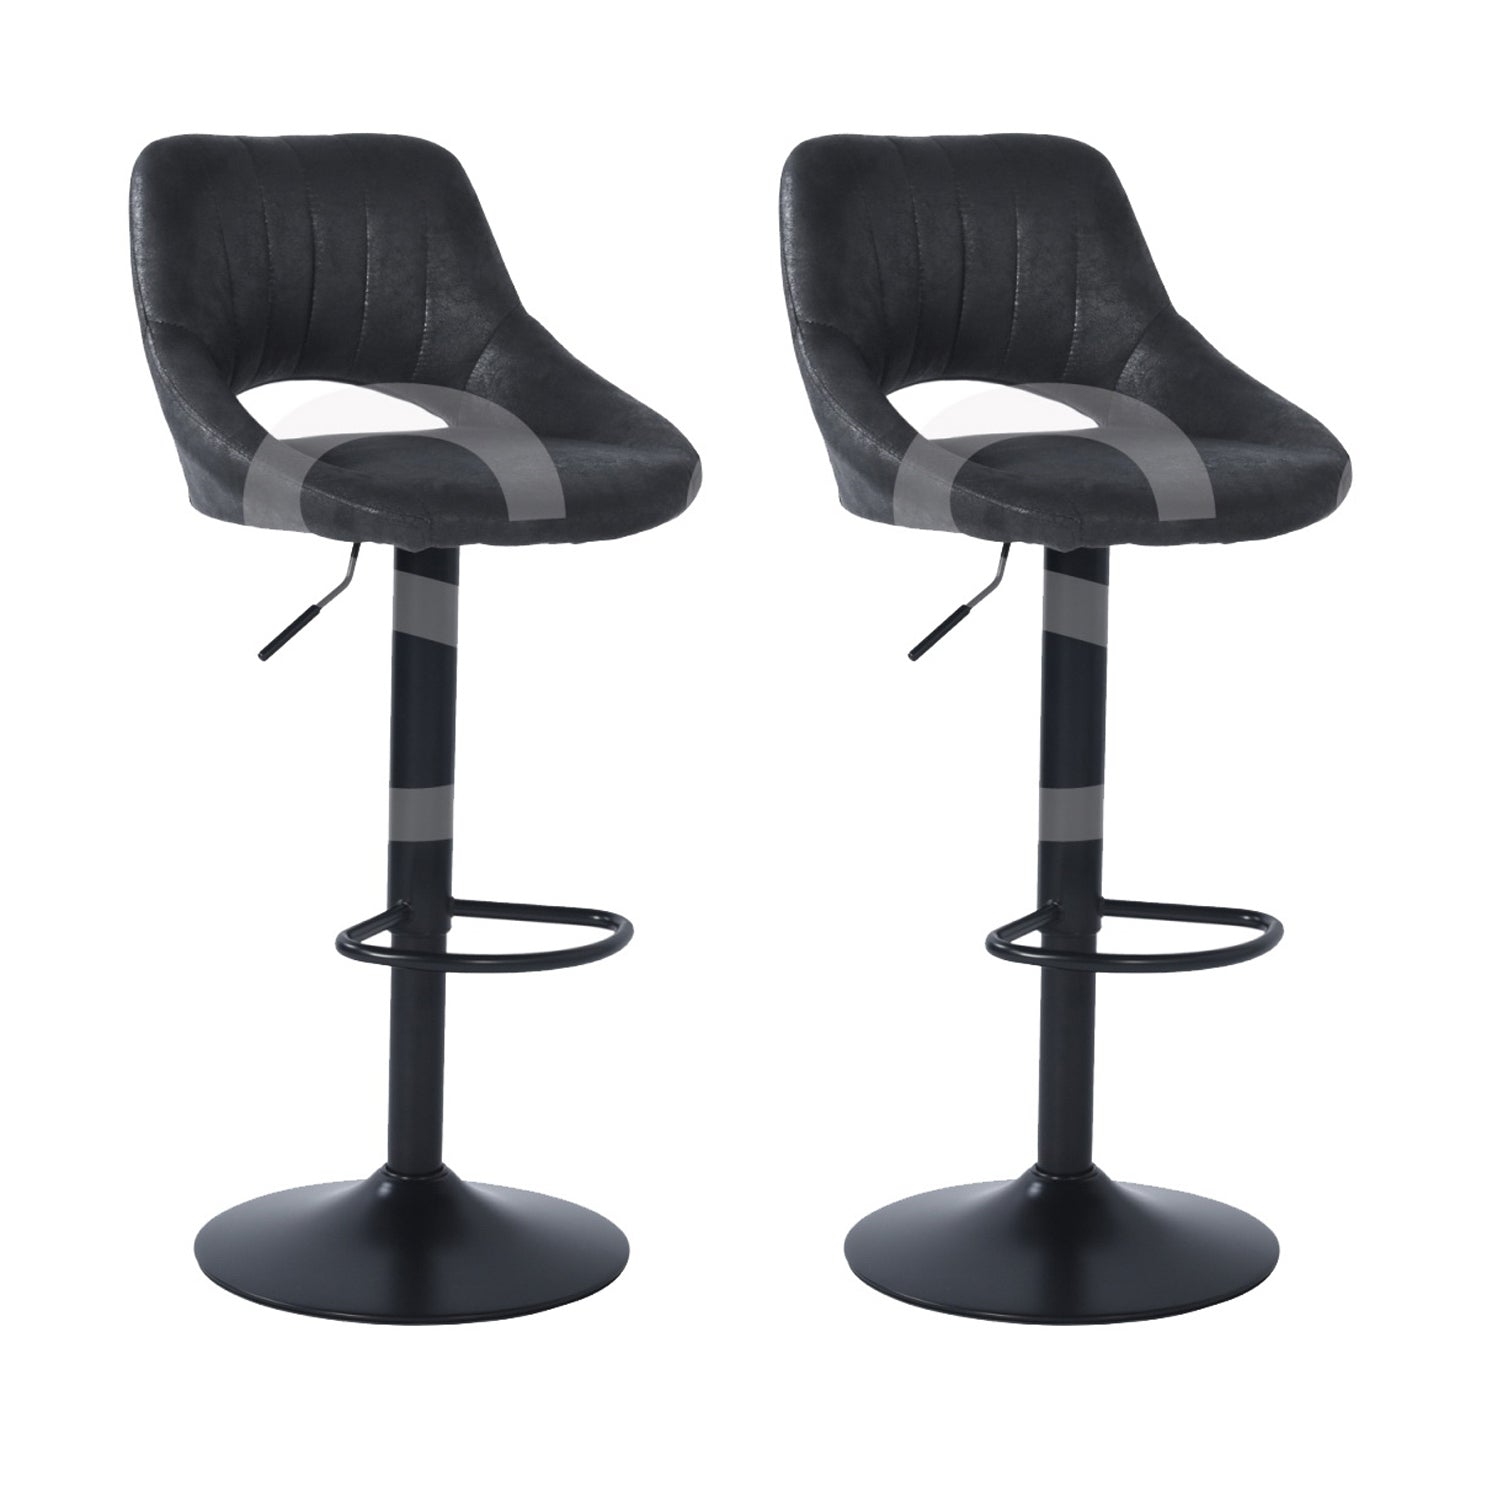 Set of 2 Bar stools, adjustable seat high chair, adjustable gas lift, with footrest, Microfiber fabric and metal Black paint - TORIN